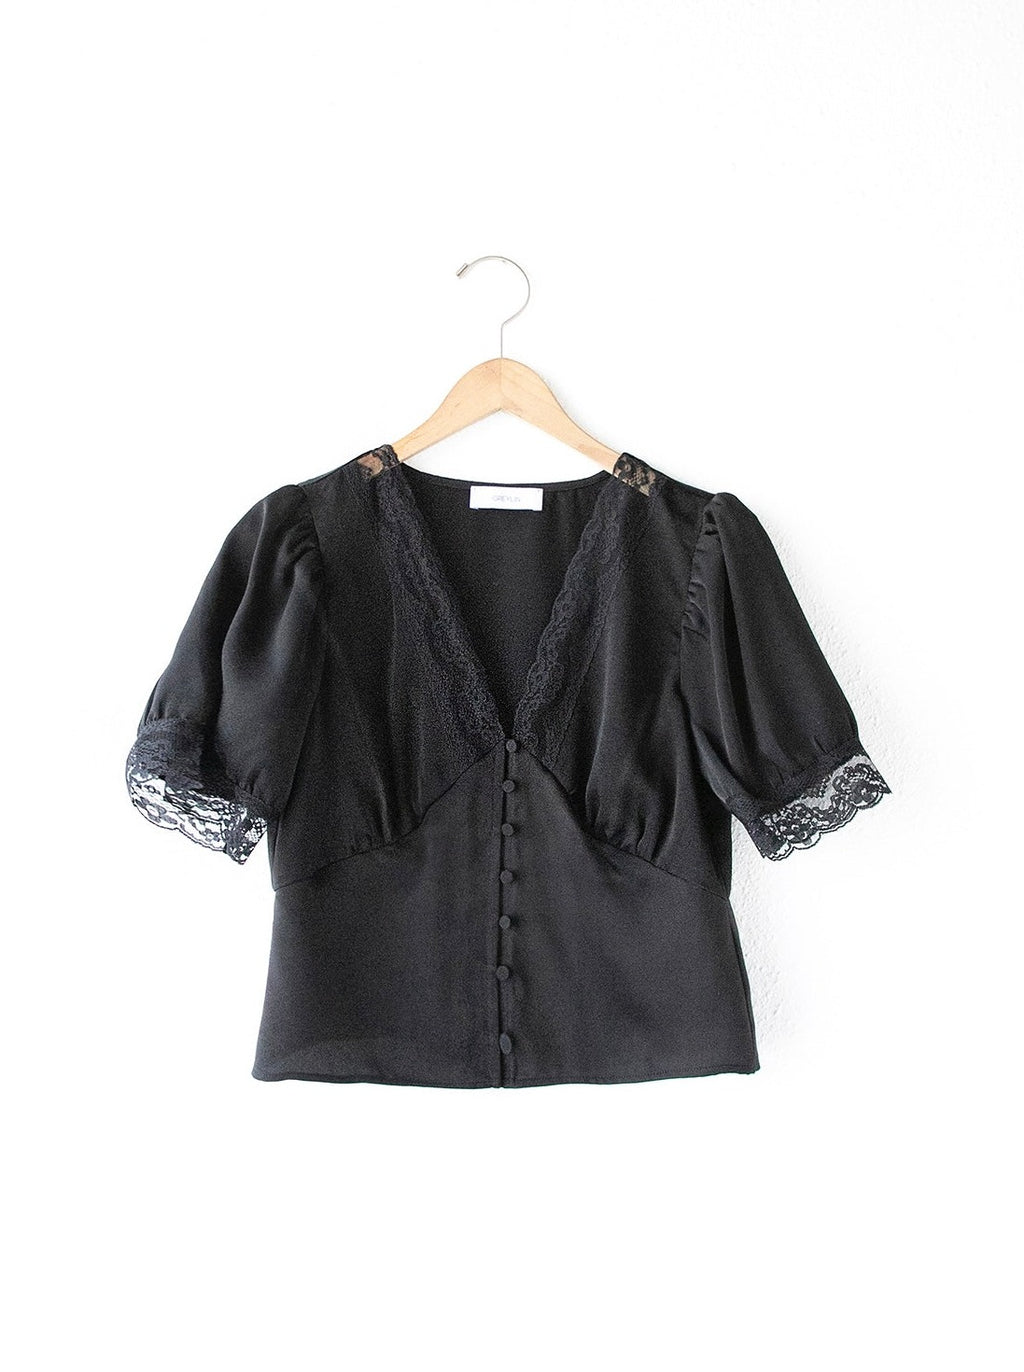 Claudia Lace Blouse in Black